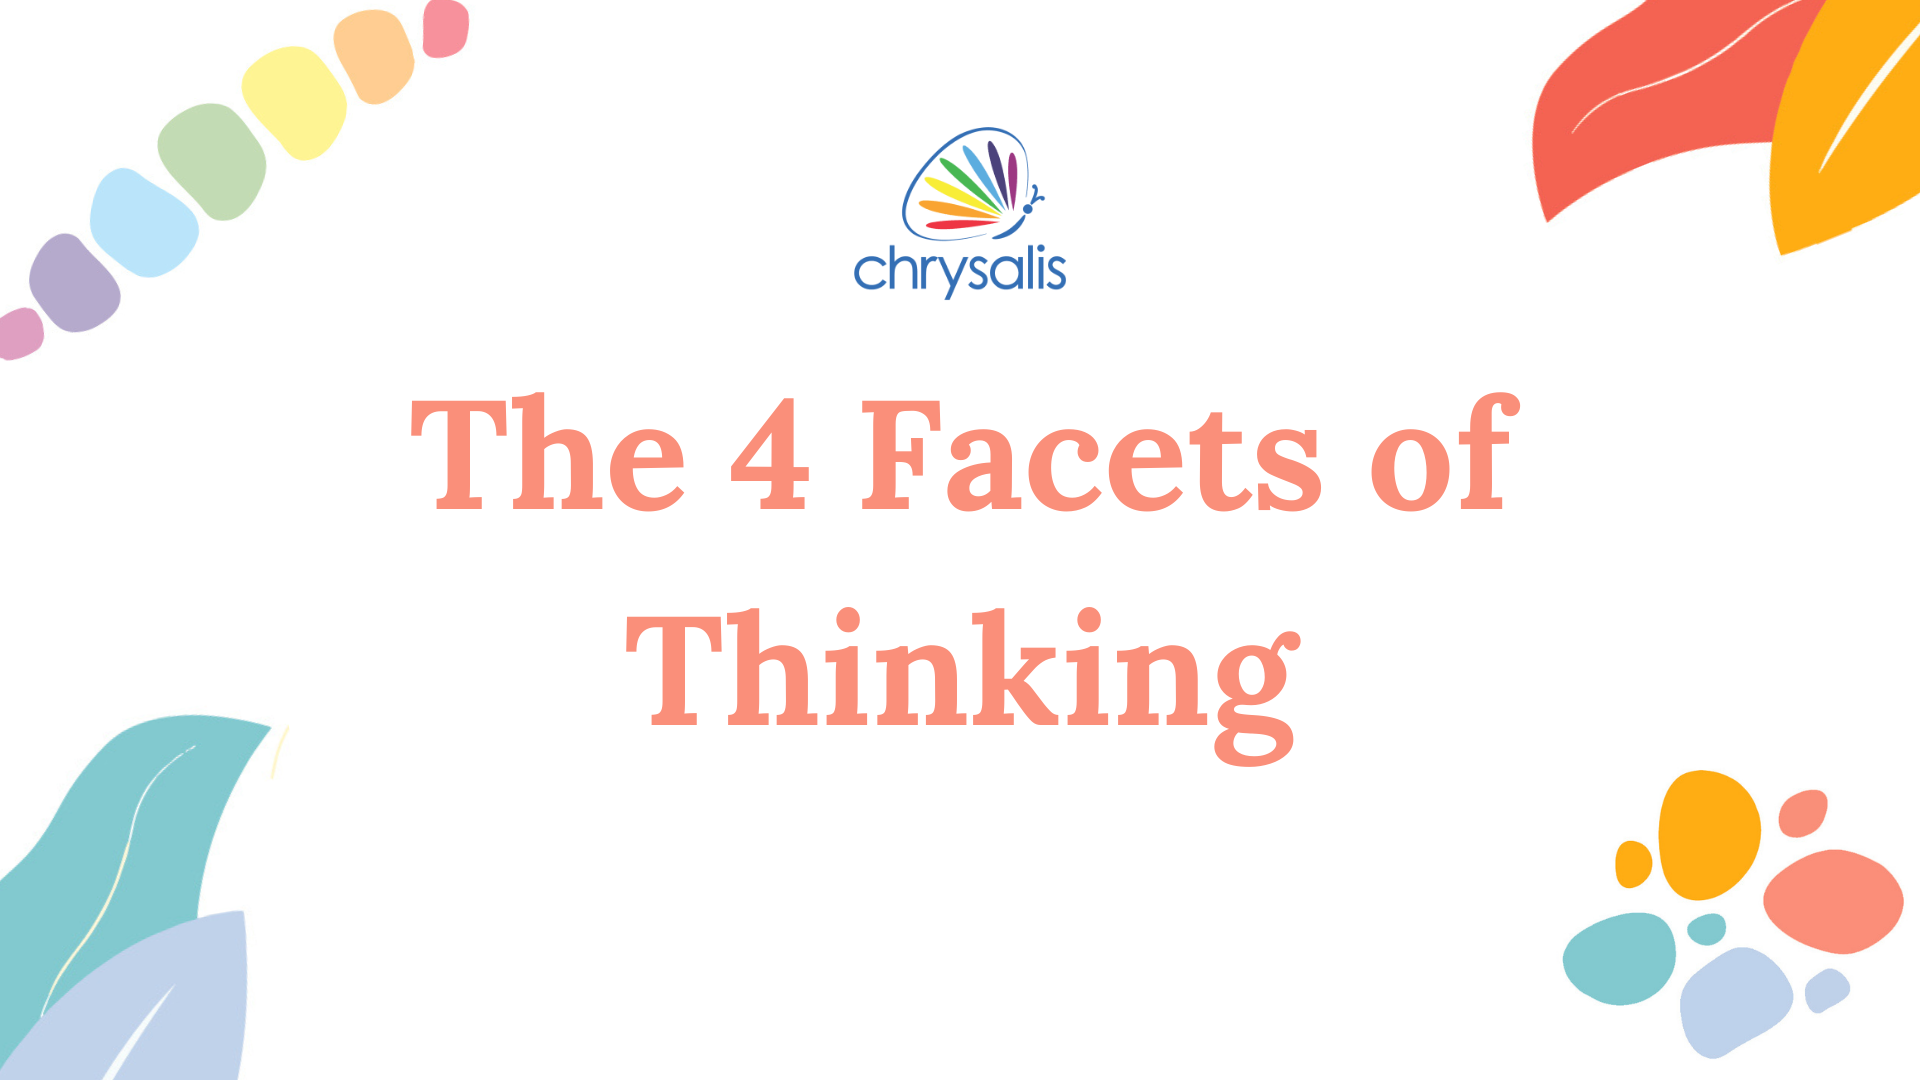 The 4 Facets of Thinking